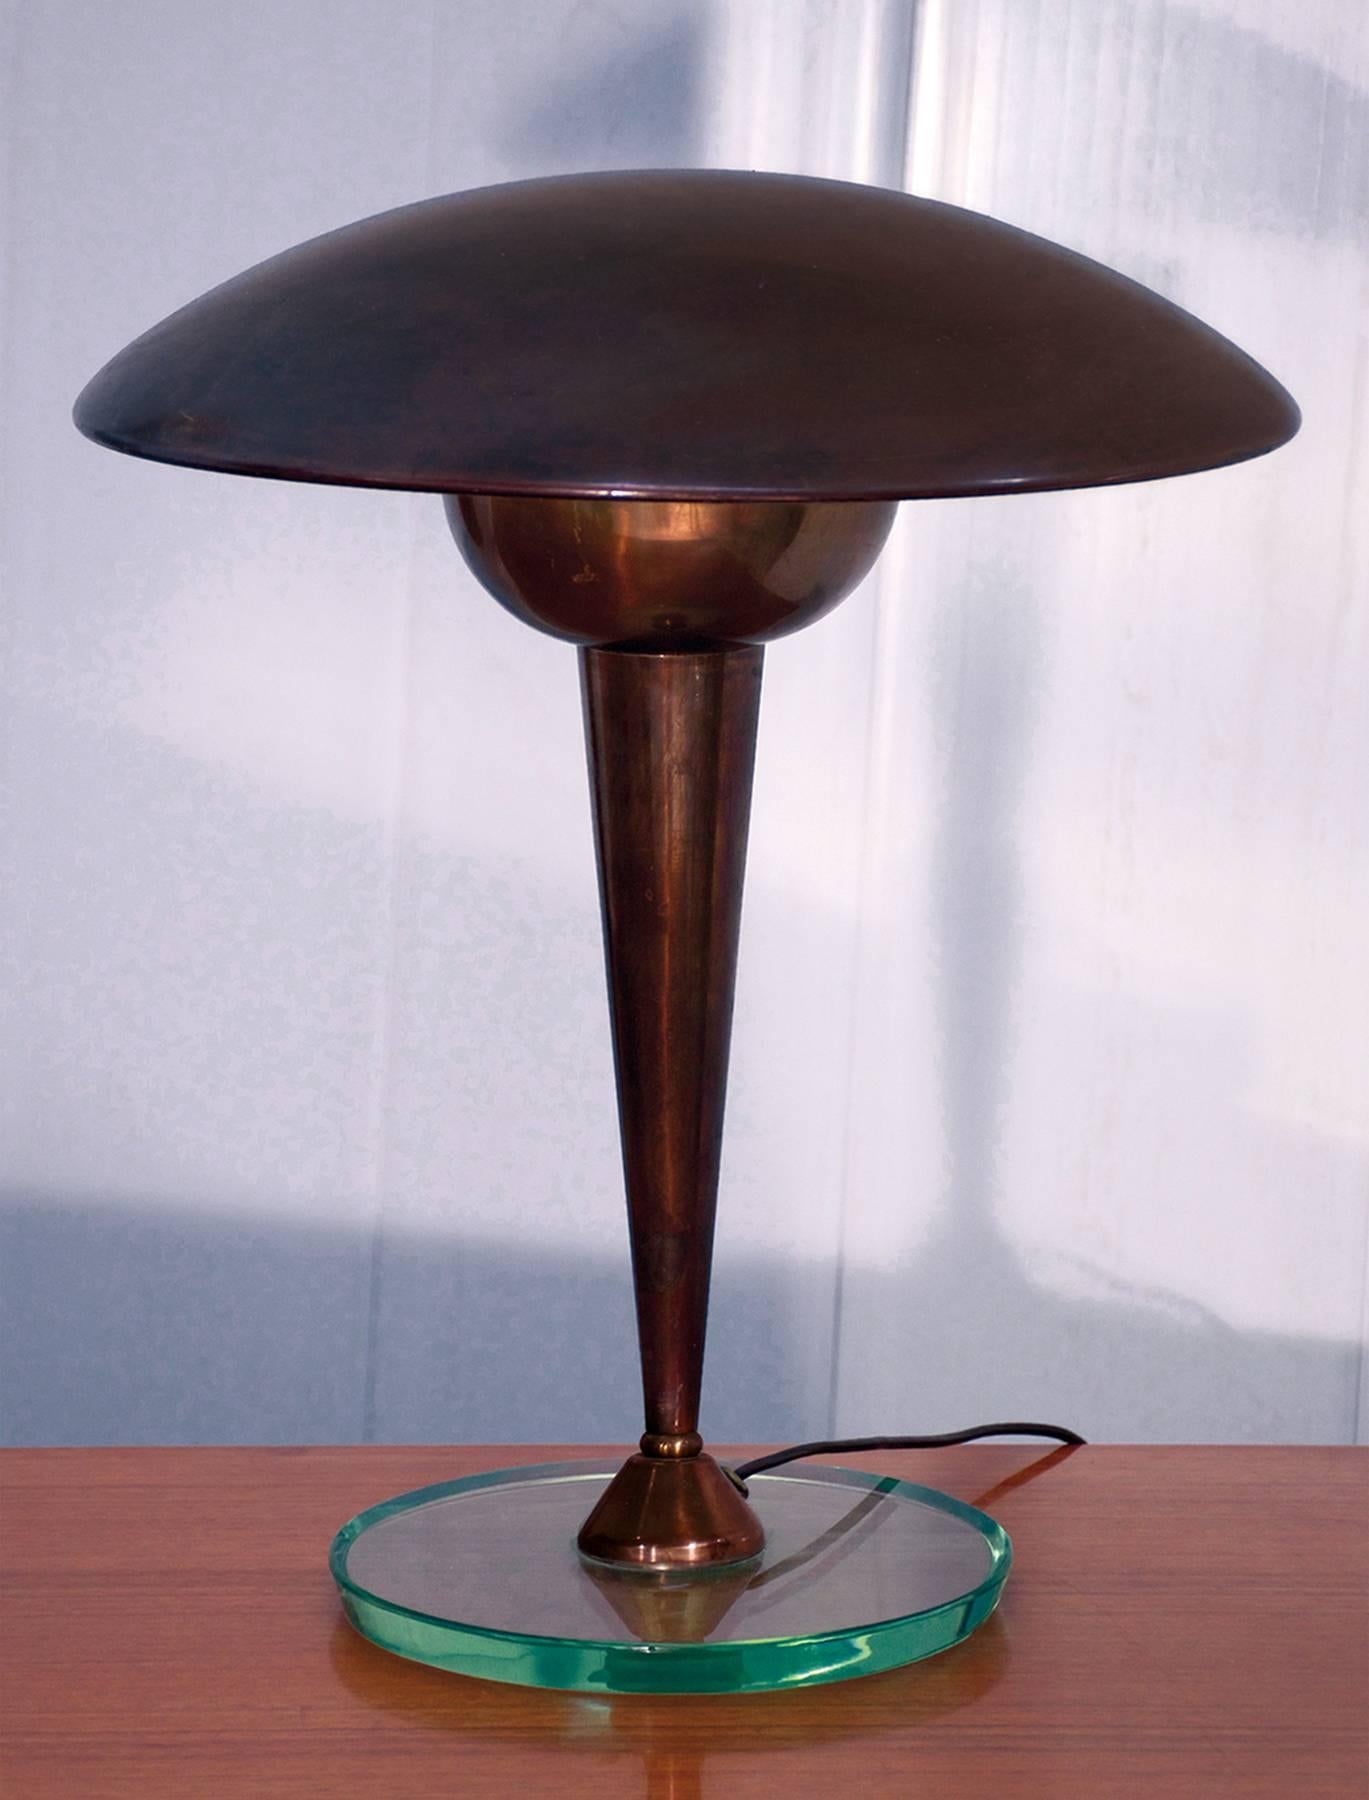 Desk lamp of the 1950s attributed to Stilnovo with brass original oxidation.
The centre column is mounted on thick bevelled round glass base (thickness 2 cm) with an adjustable pivoting lampshade.
In very good conditions of the period with beautiful